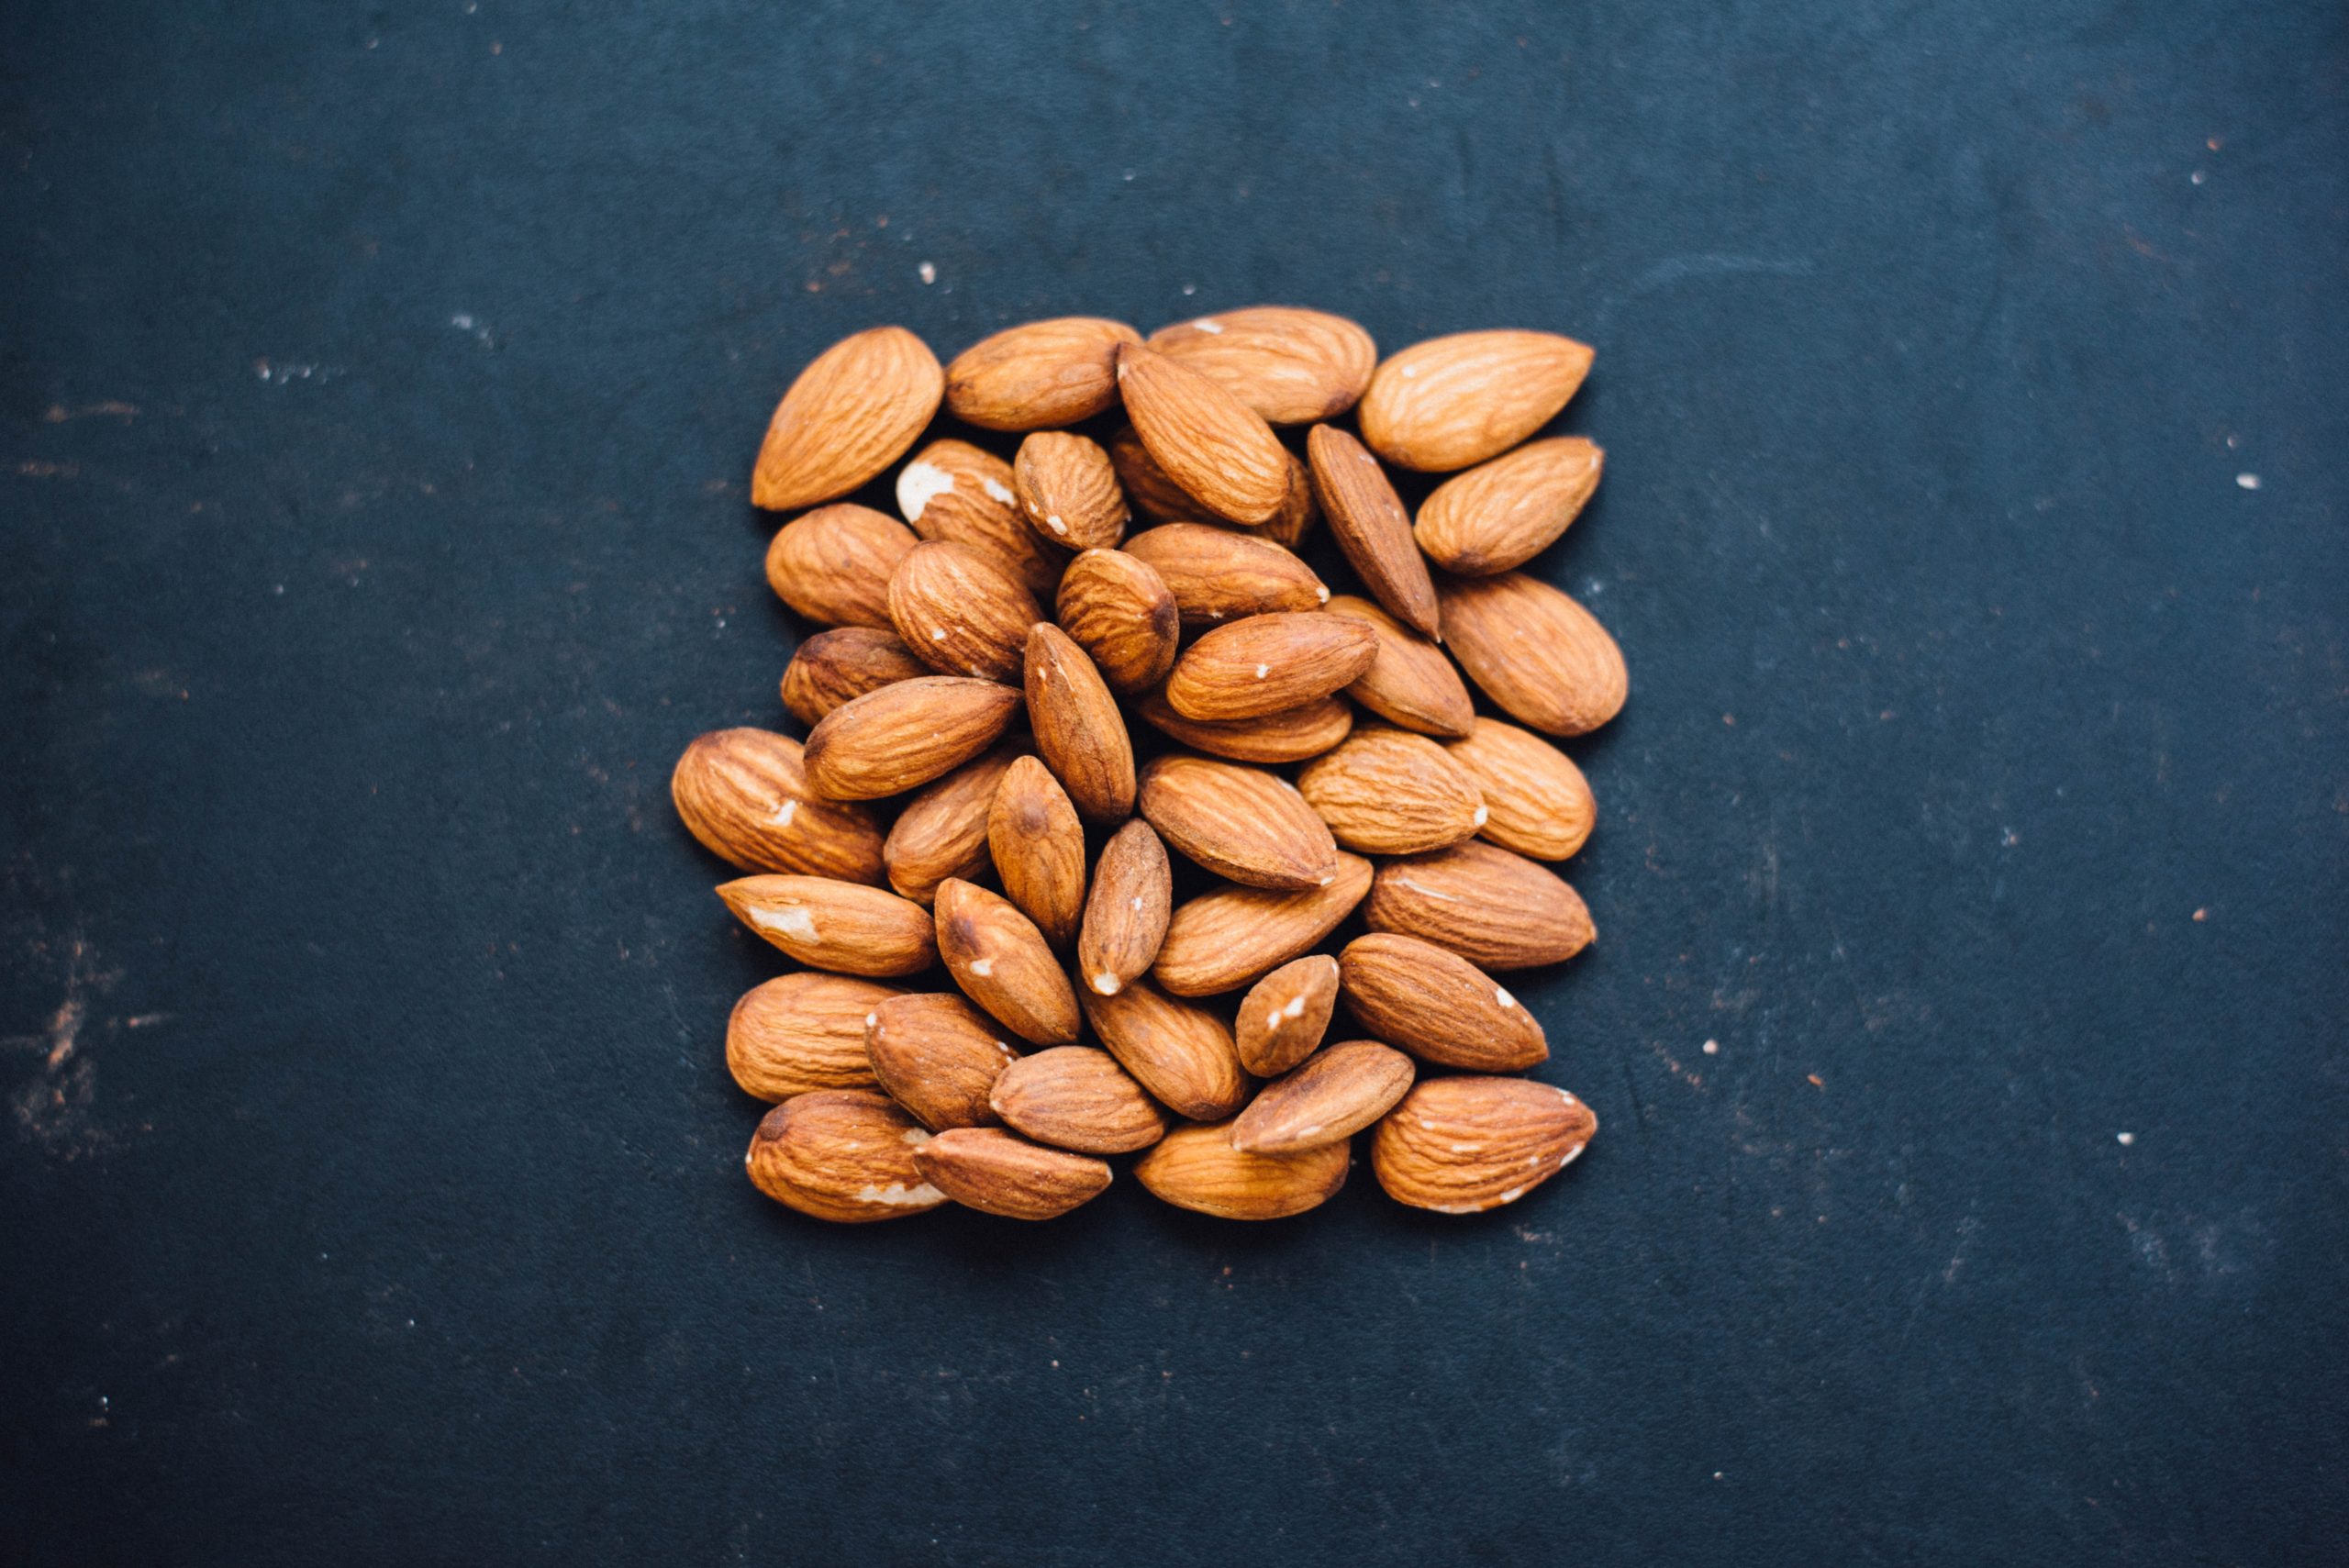 Improve your health by adding almonds to your diet